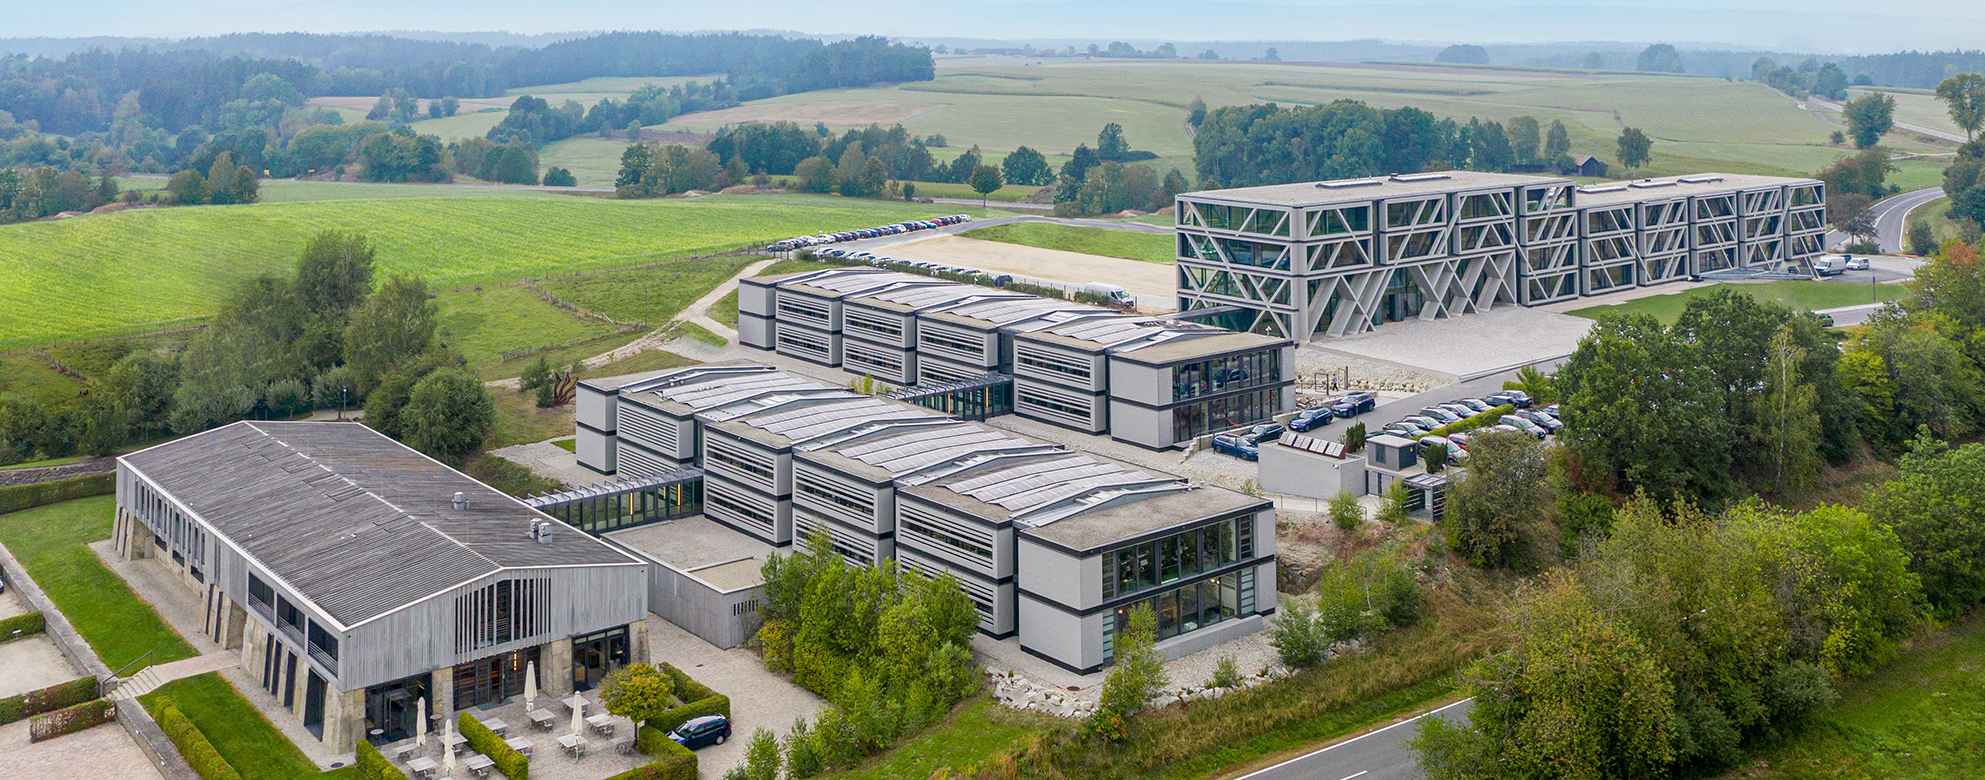 IGZ at the headquarters in Falkenberg